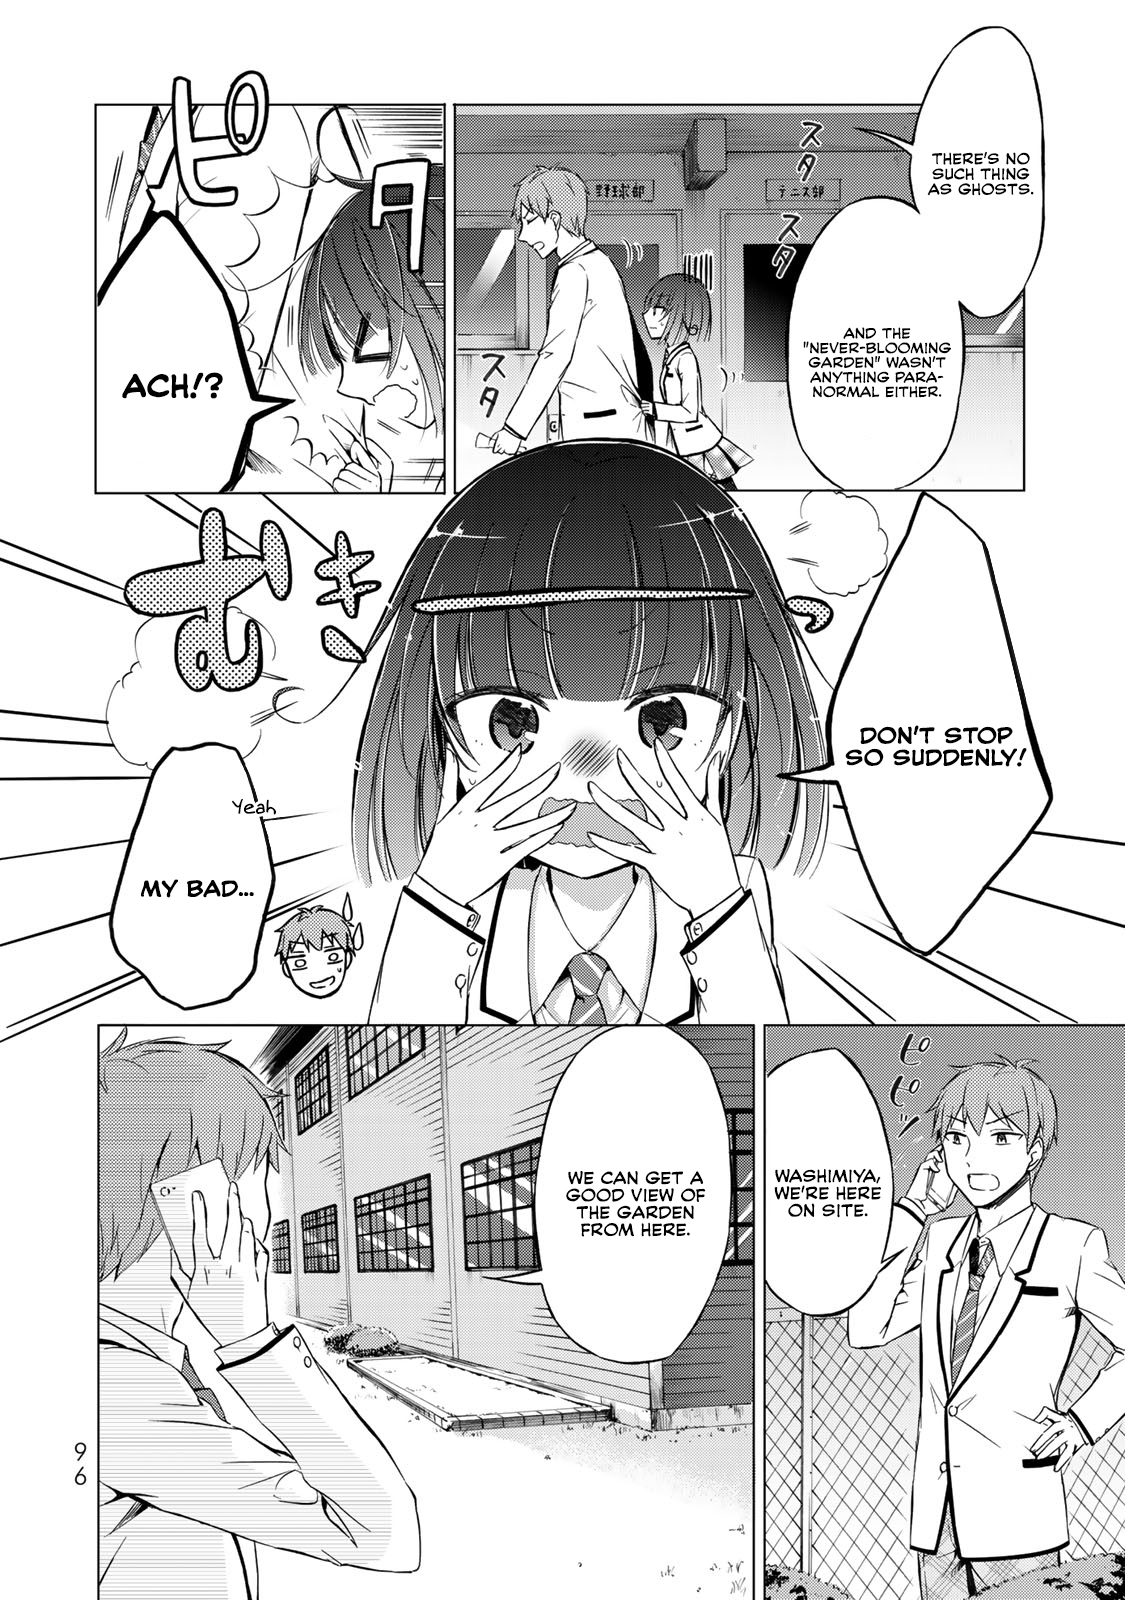 The Student Council President Solves Everything On The Bed Vol.1 Chapter 3: The Never Blooming Garden Part 2 - Picture 3